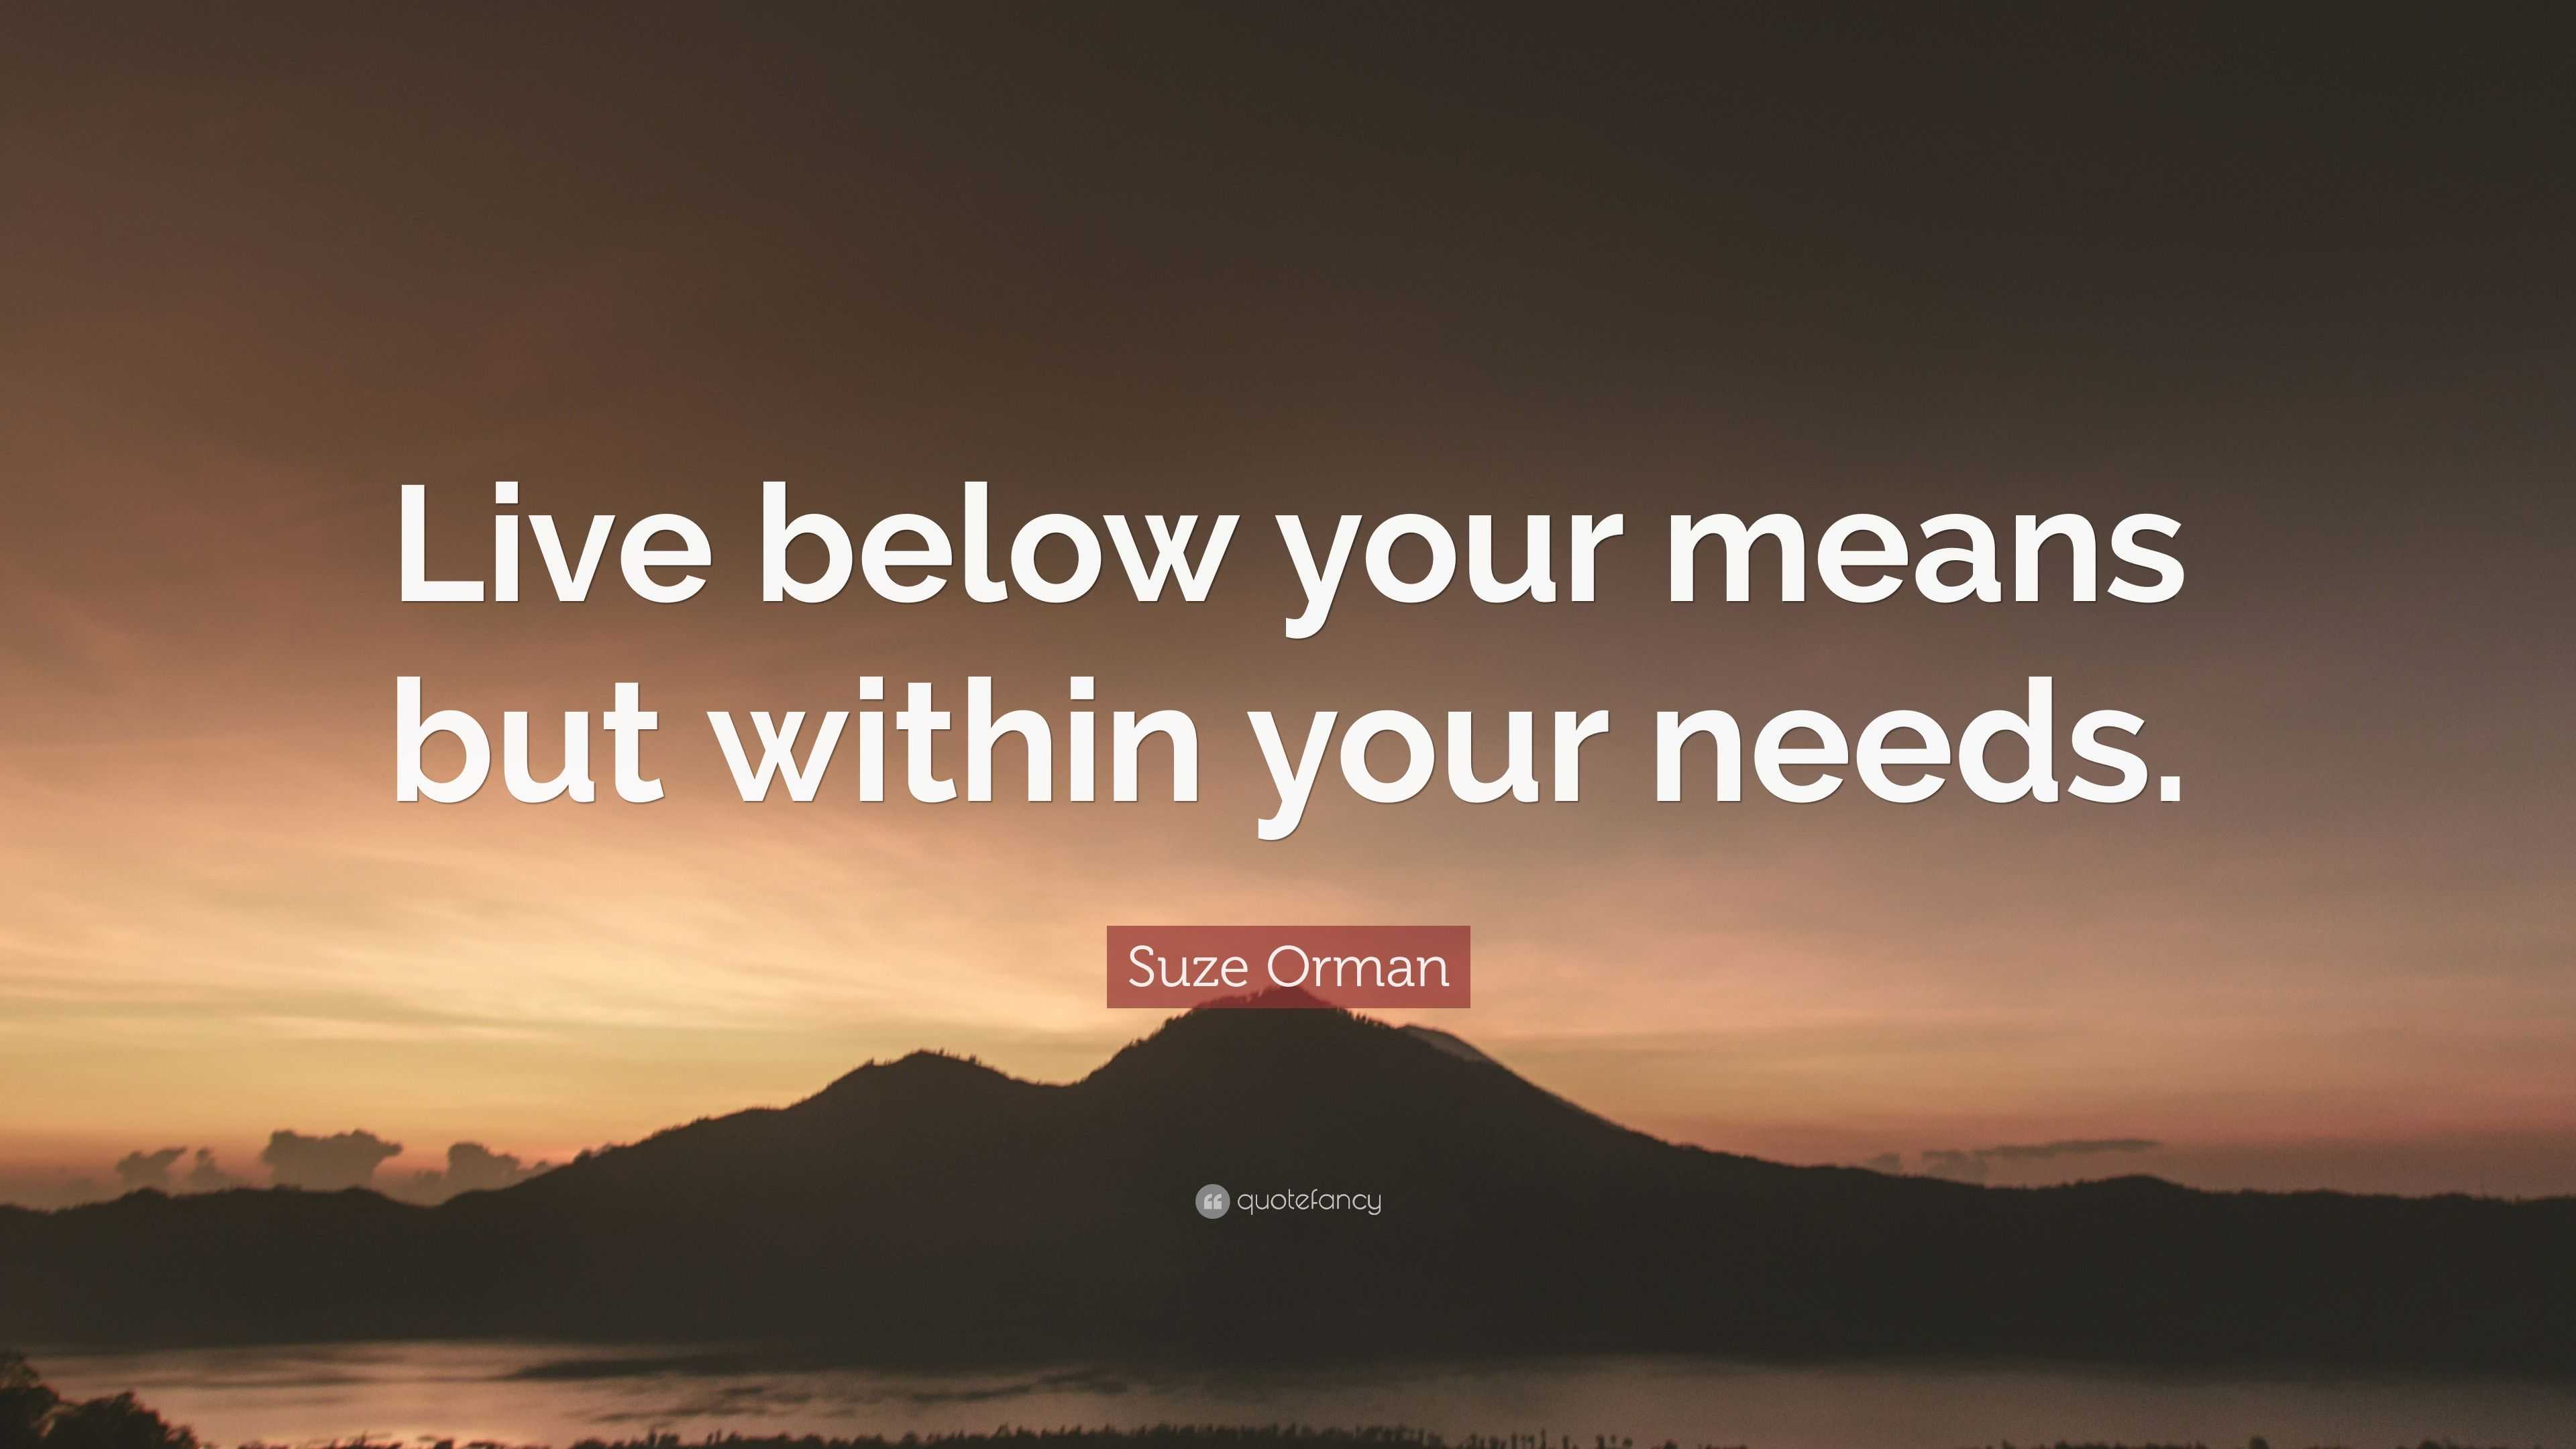 Suze Orman Quote “Live below your means but within your needs.”